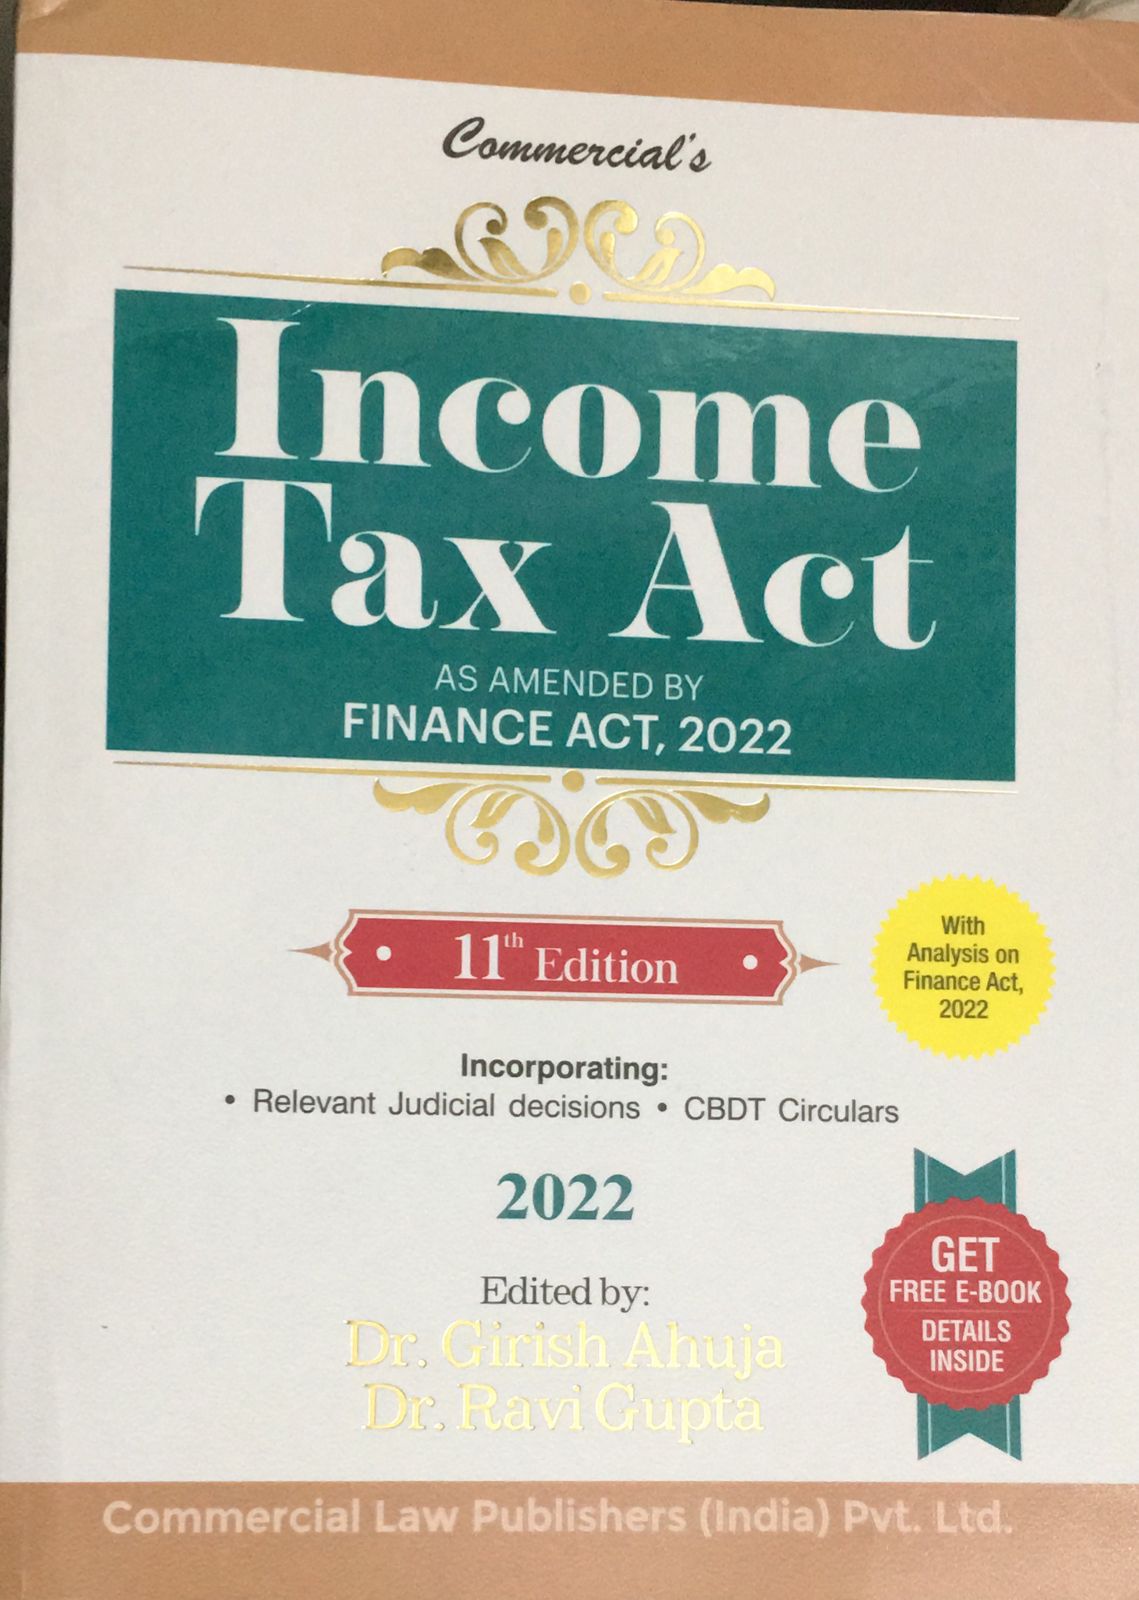 Income Tax Act As Amended by Finance Act 2023 Commercial’s 12th Edition 2023 Edited Dr Girish Ahuja Dr. Ravi Gupta Commercial law Publishers (India) Pvt Ltd with analysis on Finance Act 2022